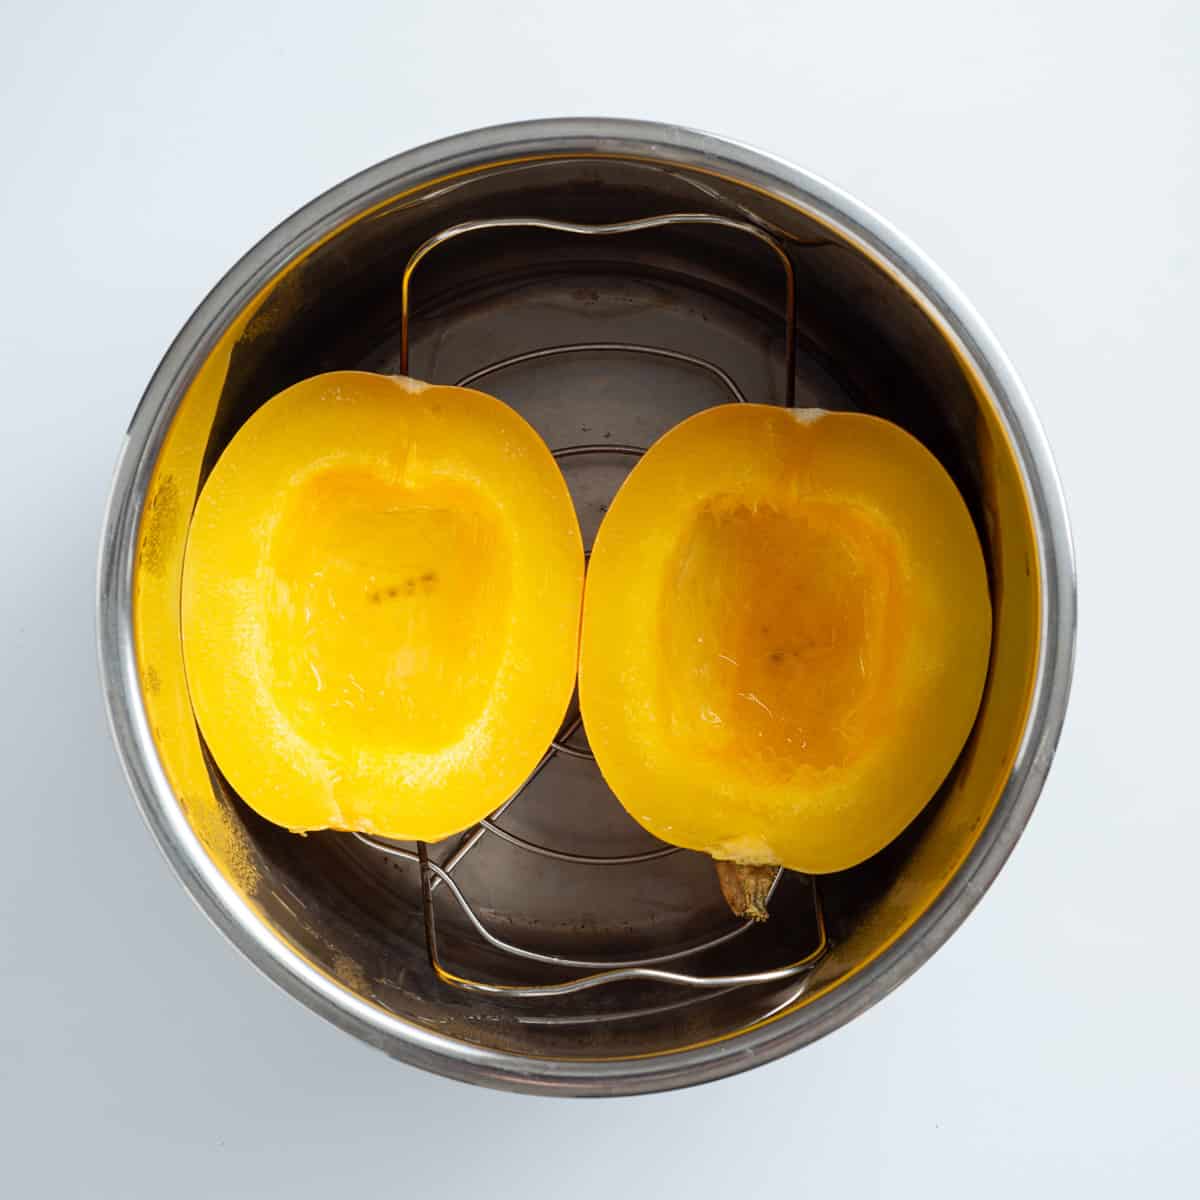 An overhead image of two spaghetti squash halves in an instant pot, before cooking.